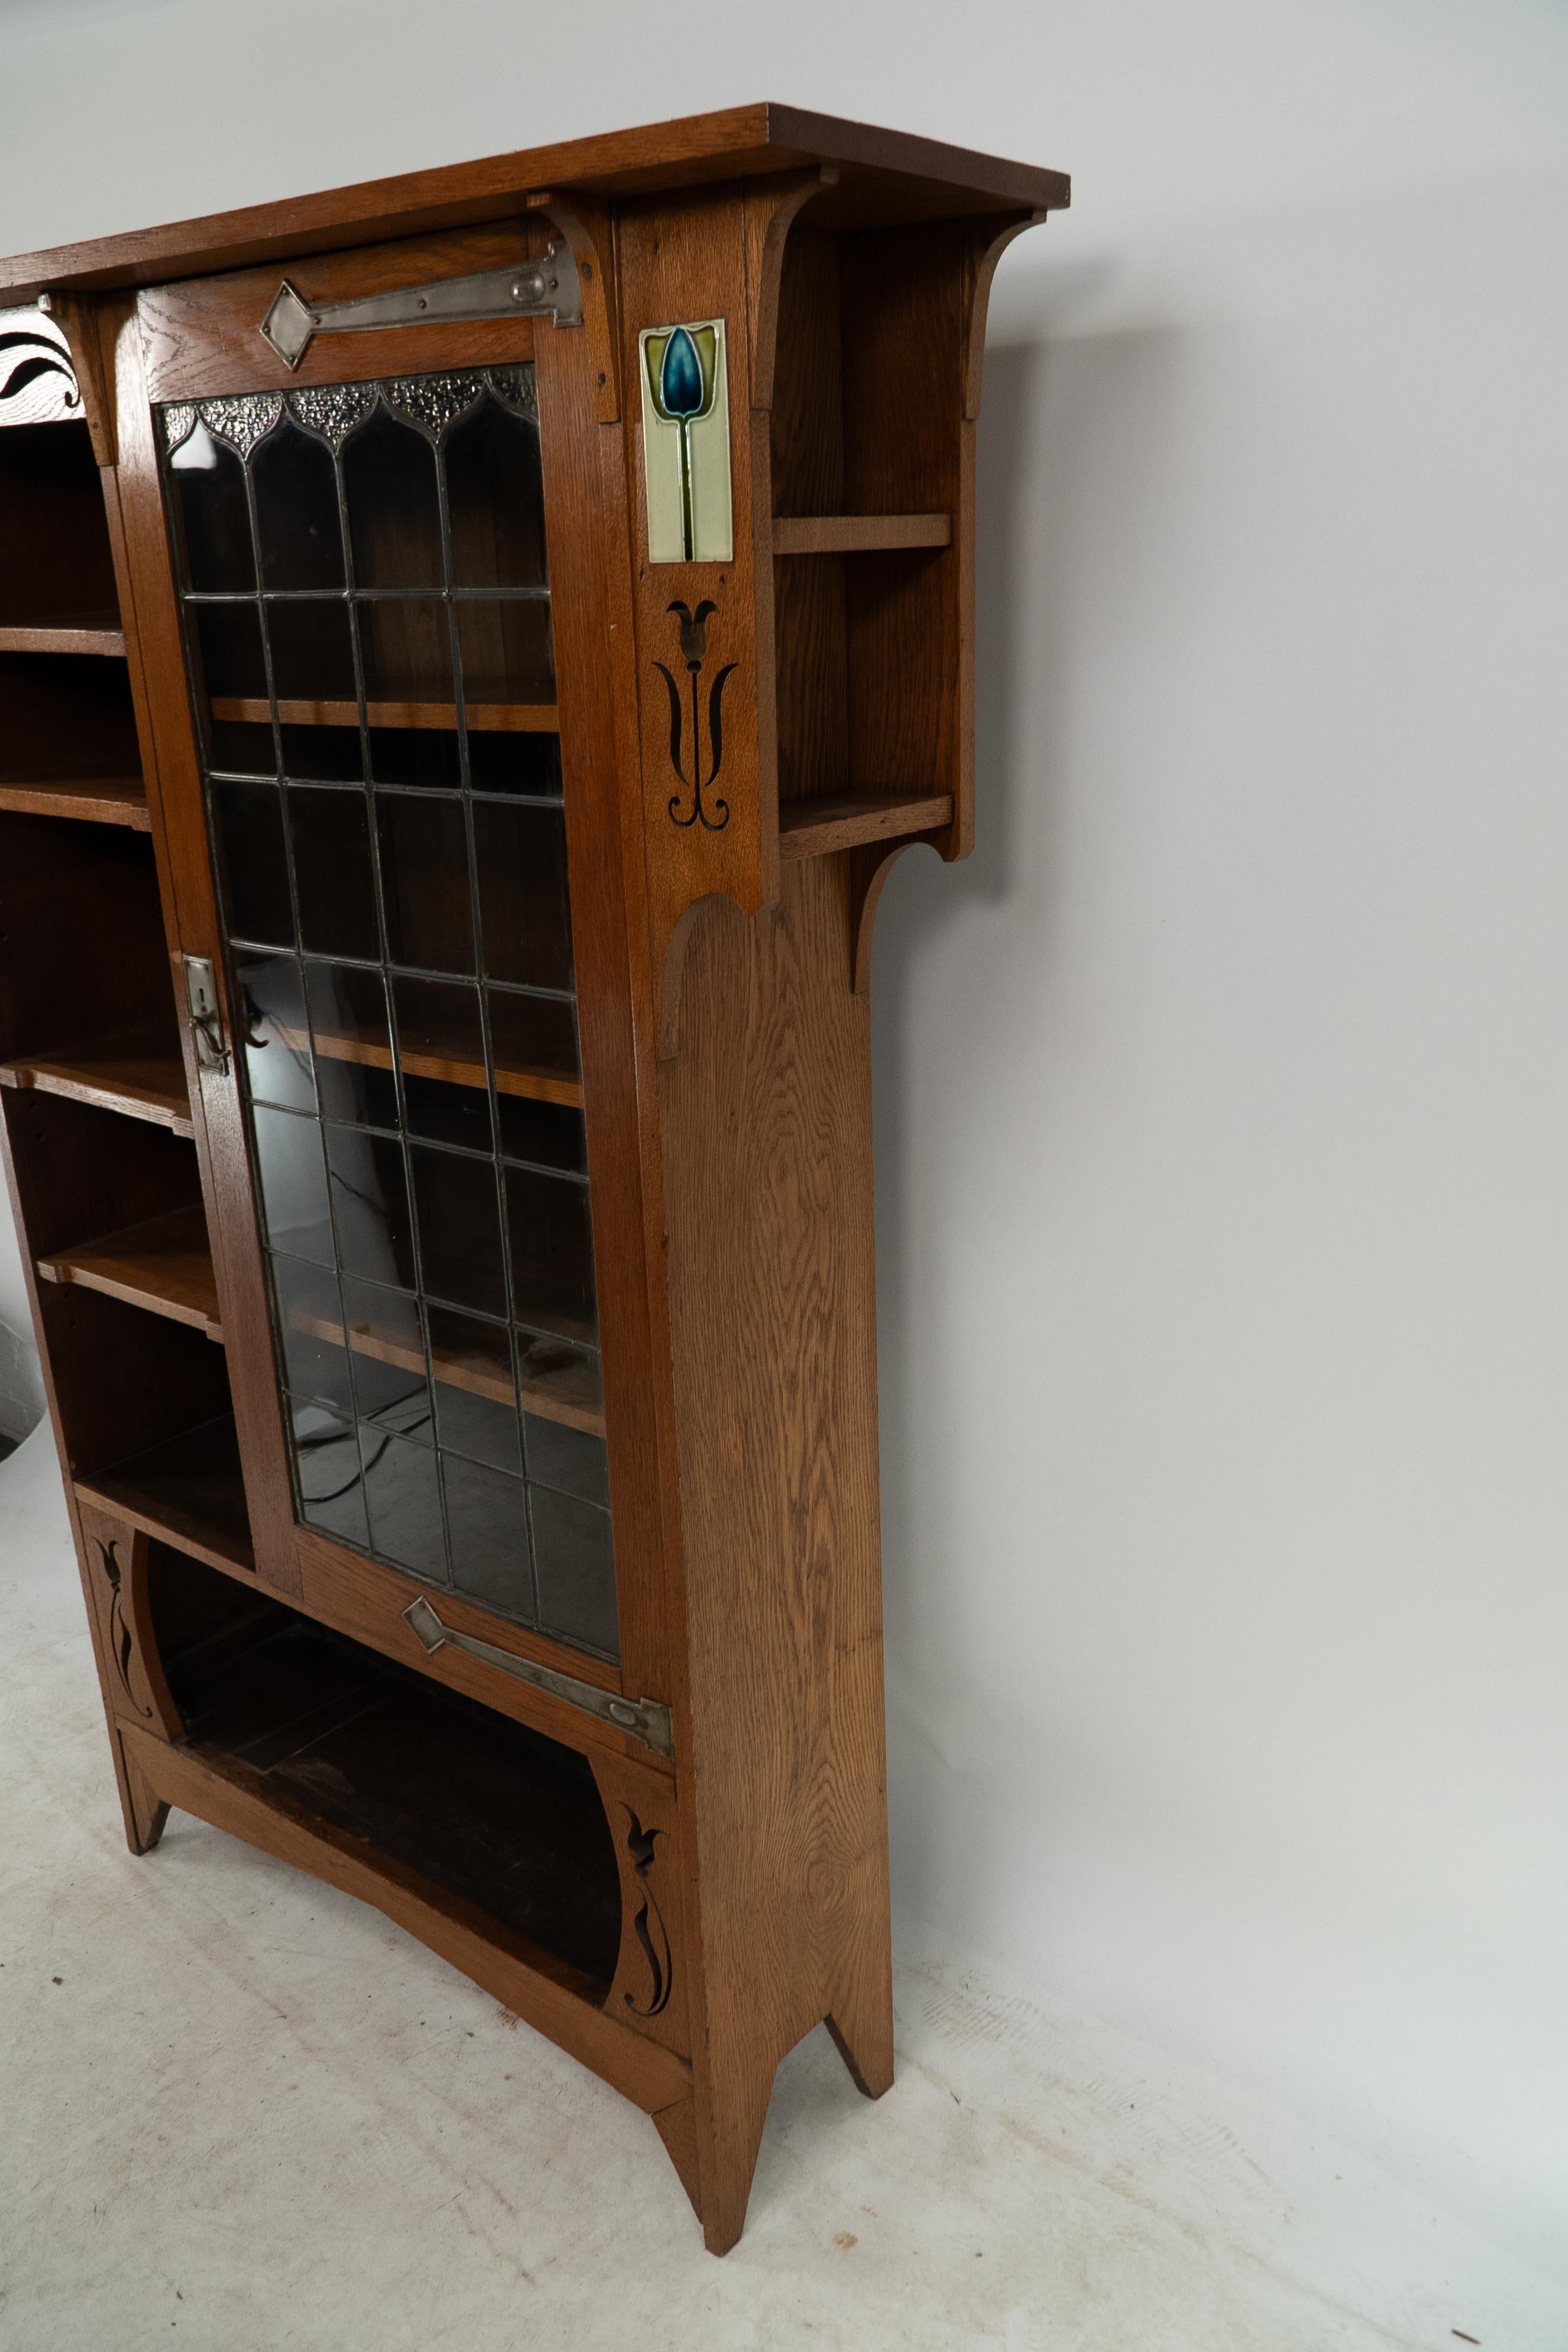 20th Century Arts and Crafts Oak Glazed Bookcase with inset period tiles